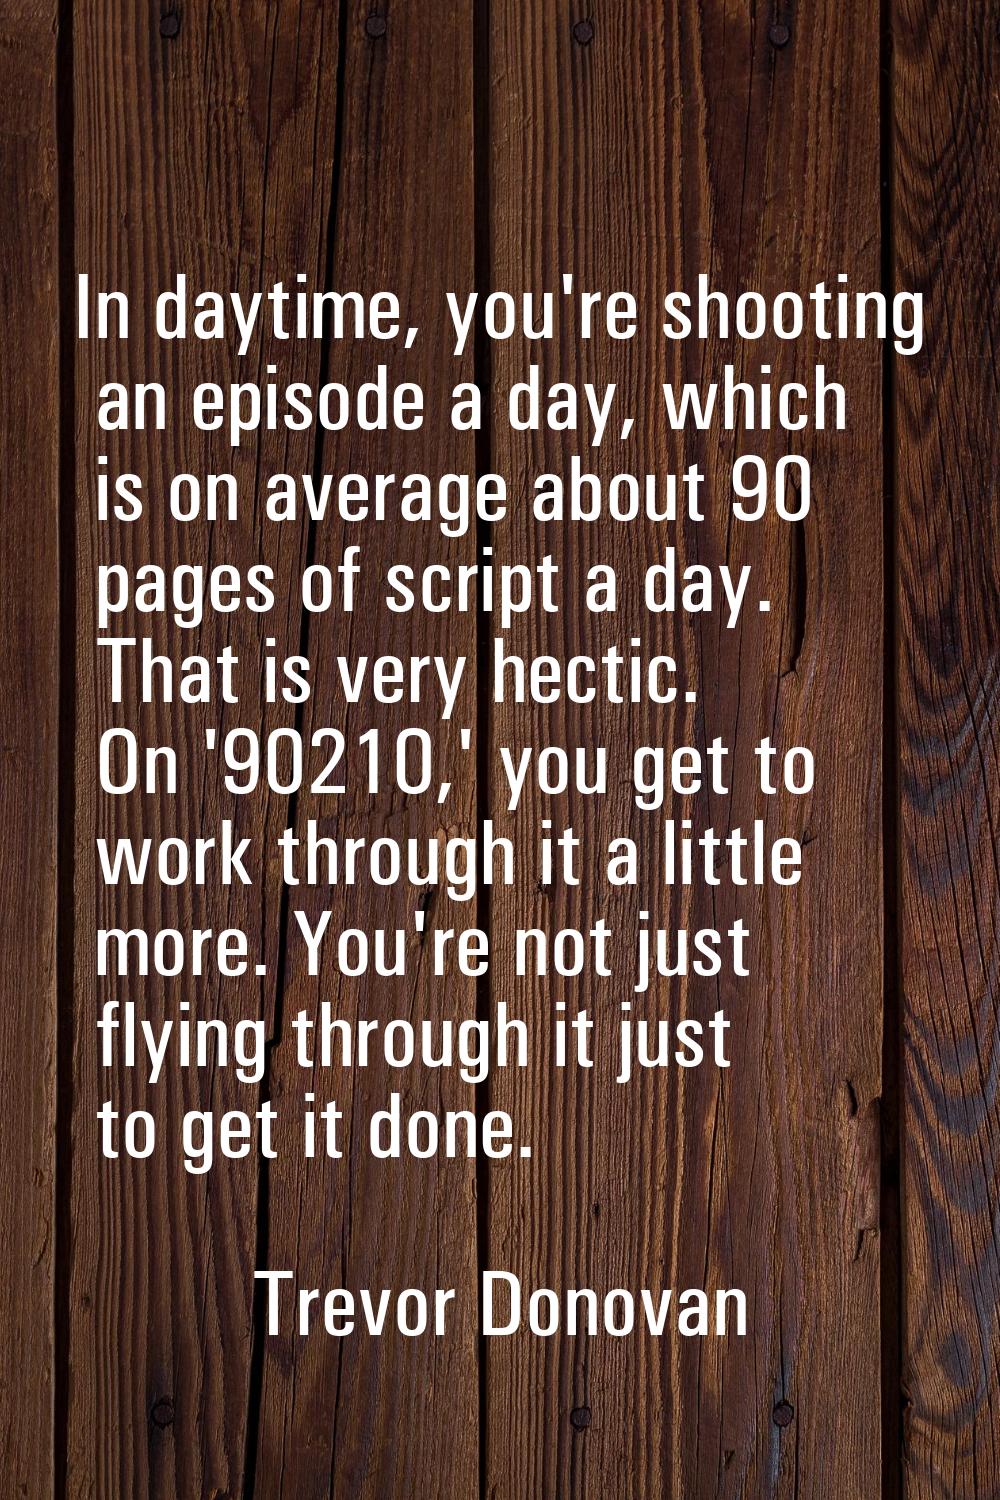 In daytime, you're shooting an episode a day, which is on average about 90 pages of script a day. T